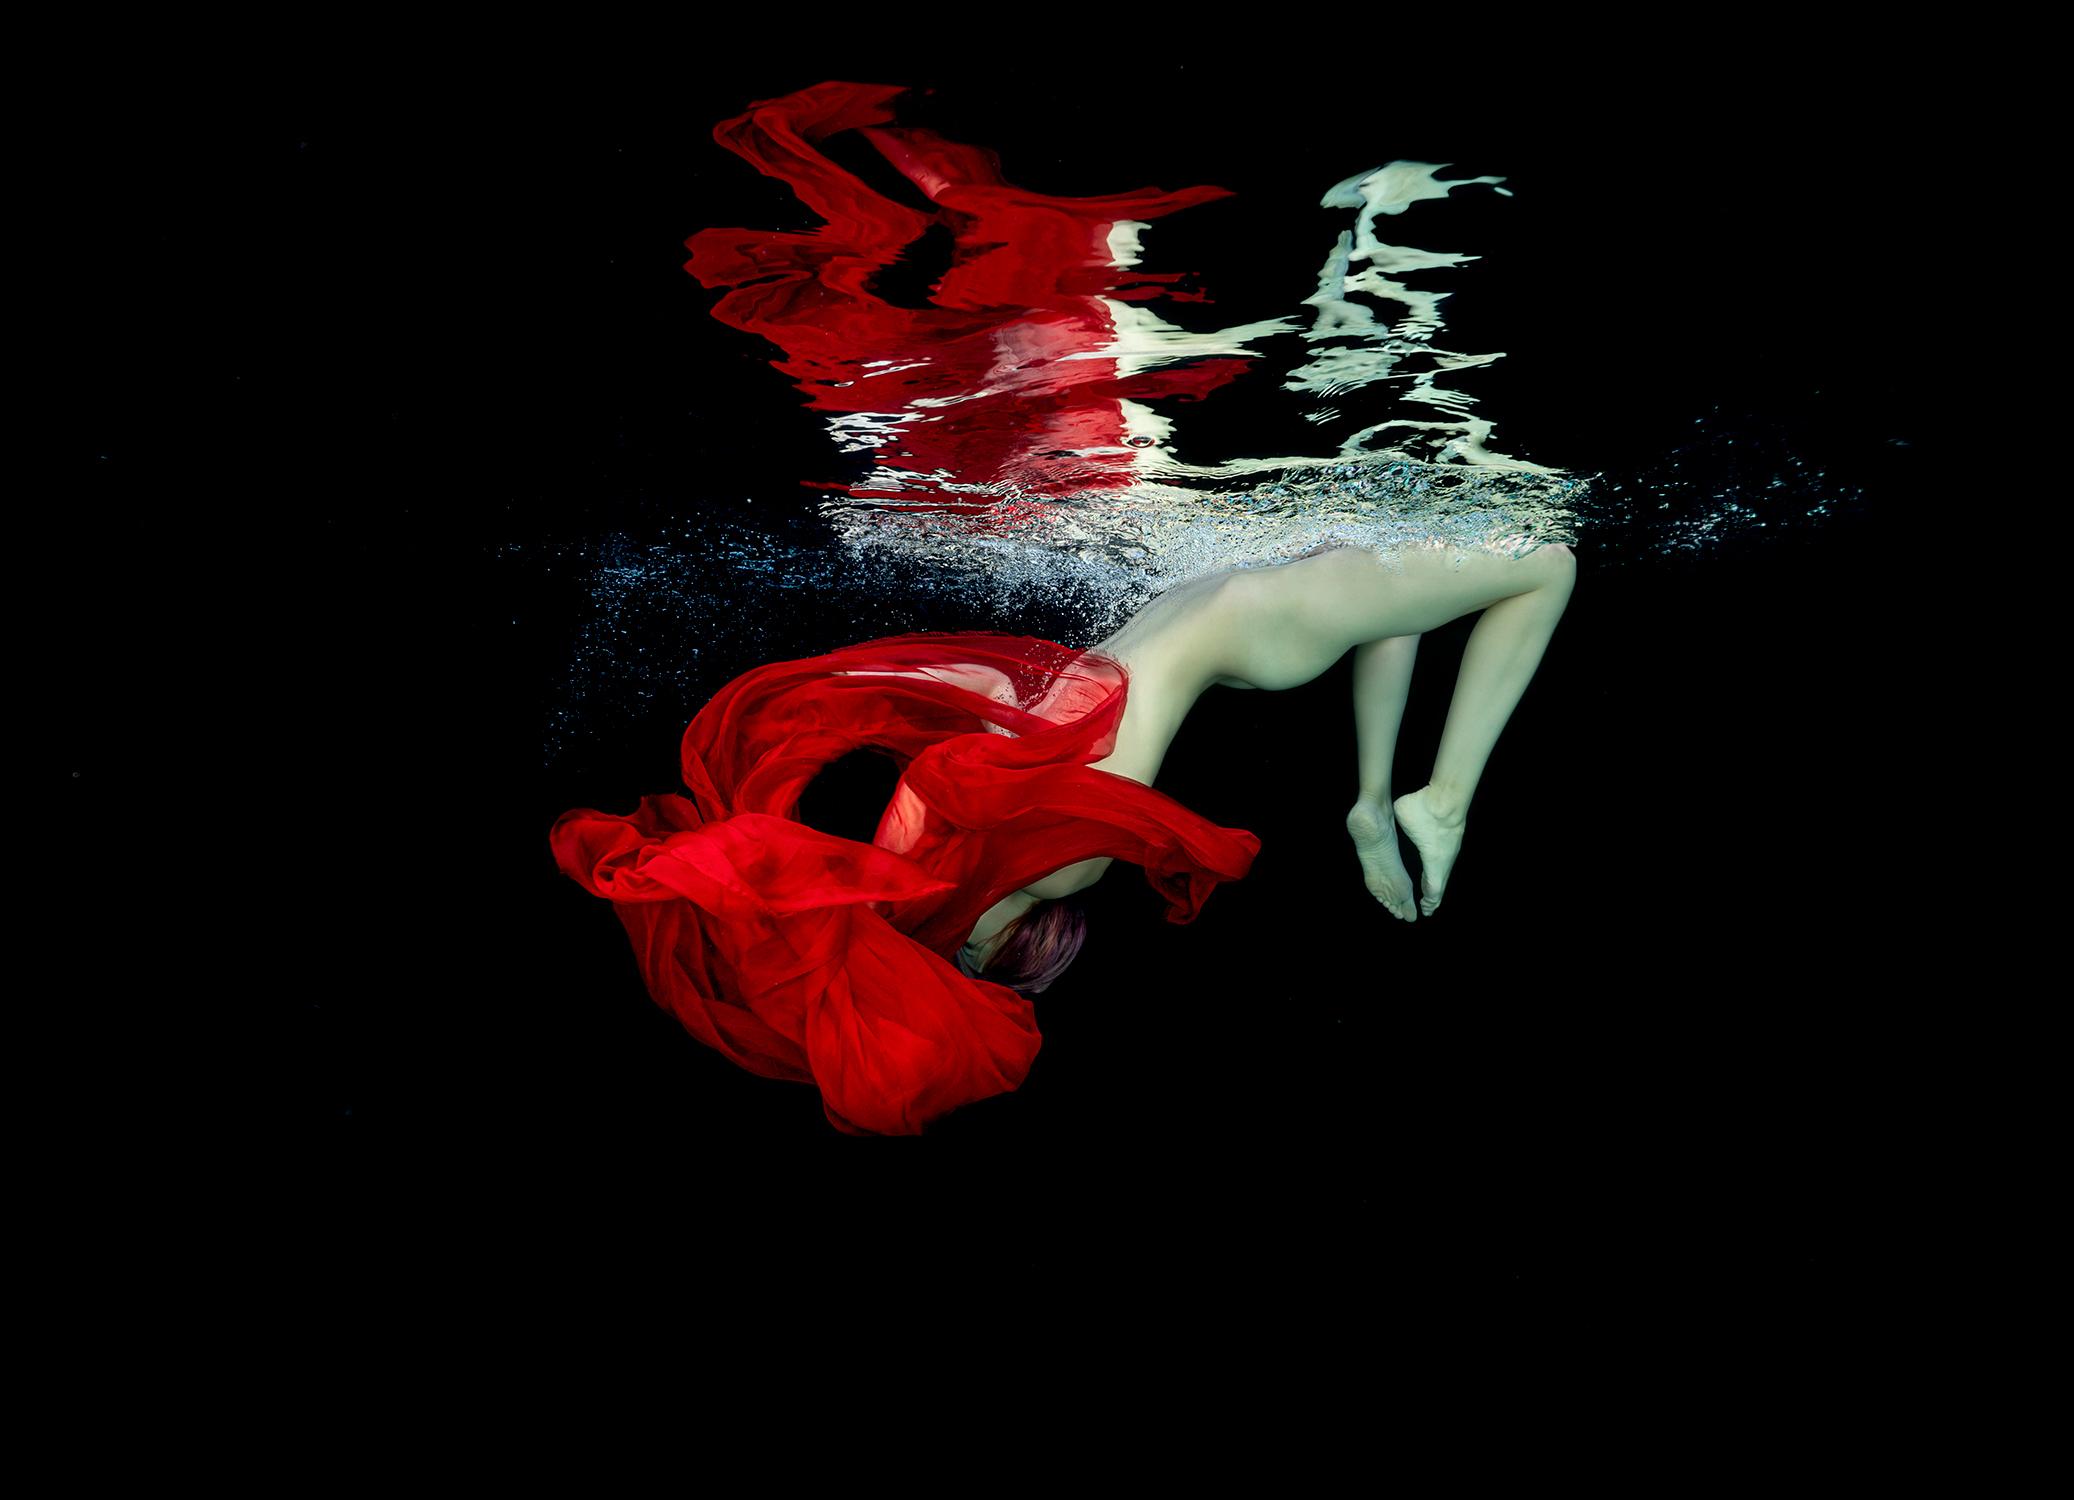 Blood Drop - underwater nude photograph - print on paper 26 x 36"